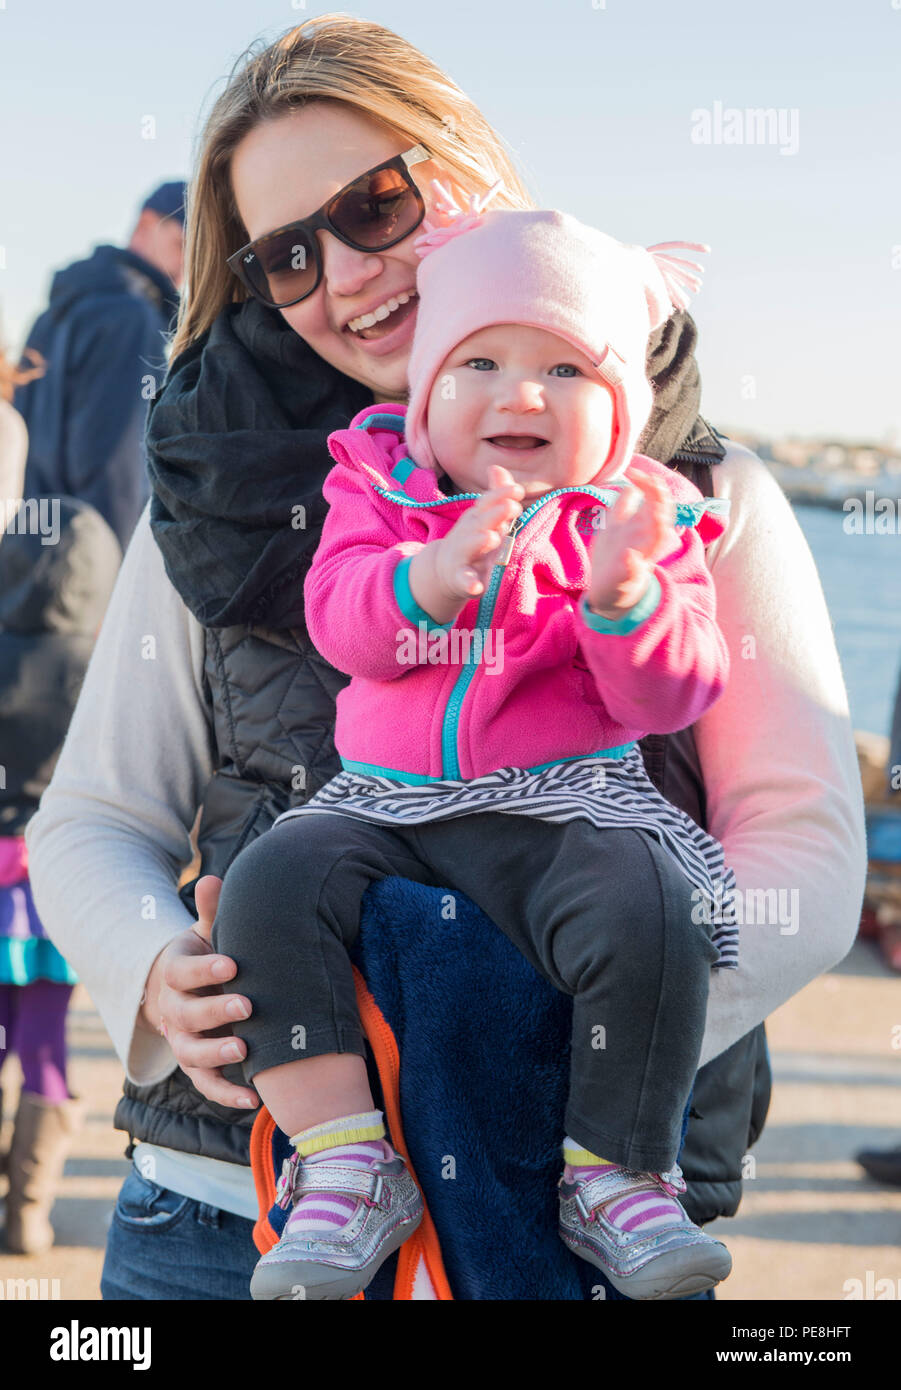 Lindsay Welch and her daughter Teagan wait for Lt. Steven Welch, the Operations Officer aboard the Coast Guard Cutter Spencer, while the cutter moors in Boston Friday, Oct. 30, 2015, after a 65-day patrol of the Caribbean Sea. During the patrol, Spencer’s crew intercepted four go-fast vessels suspected of trafficking drugs, and directly contributed to the seizure 2,204 pounds of marijuana and 13,697 of cocaine worth approximately $50 million. (U.S. Coast Guard photo by Petty Officer 2nd Class Cynthia Oldham) Stock Photo